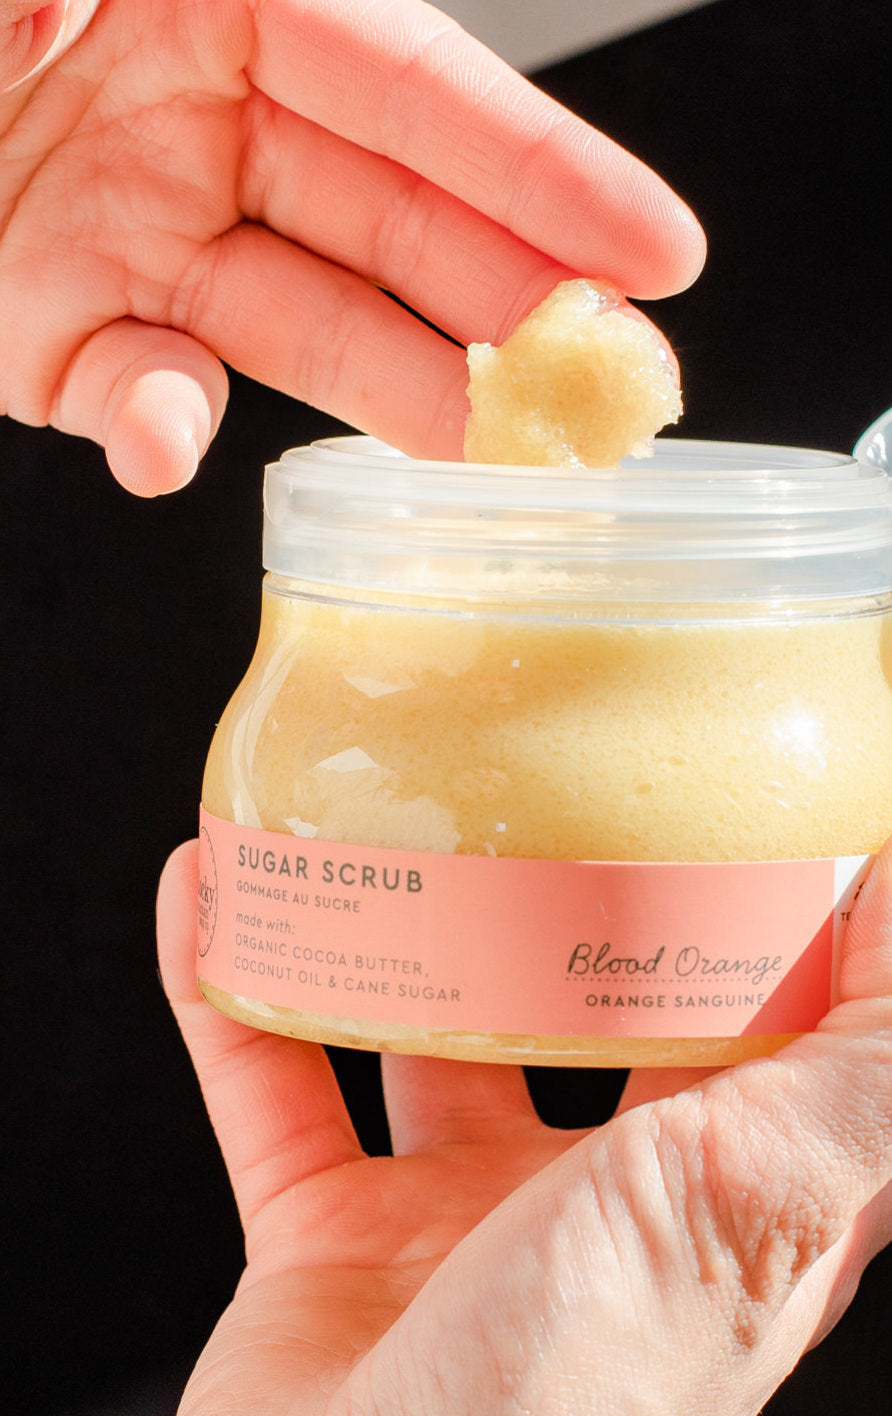 hands holding a container of sugar scrub